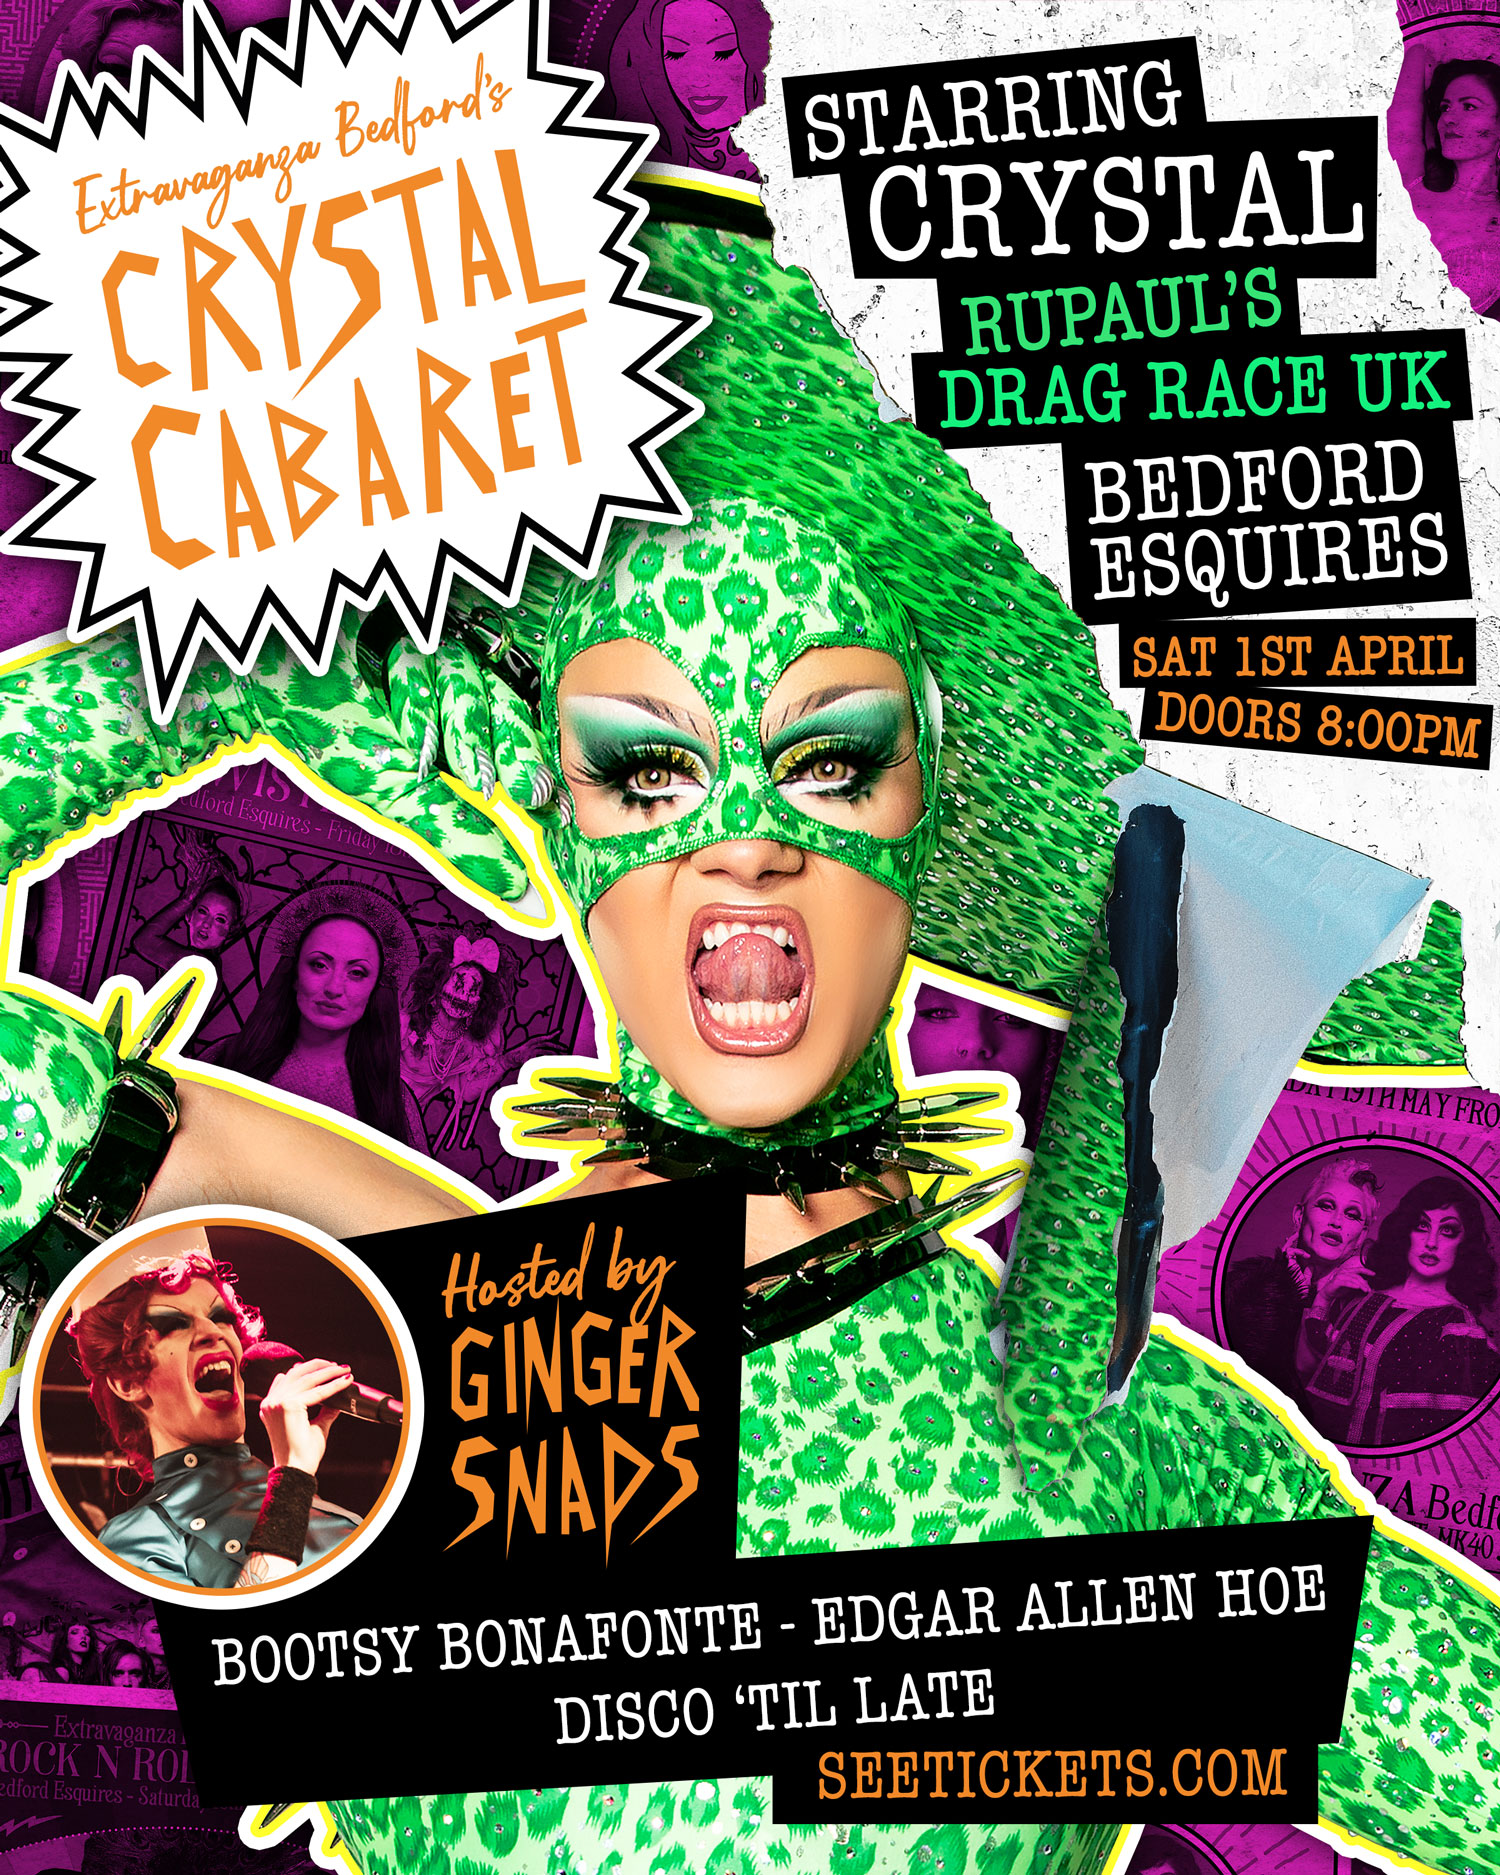 Extravaganza Bedford Poster - Attitude Live Music and Cabaret 